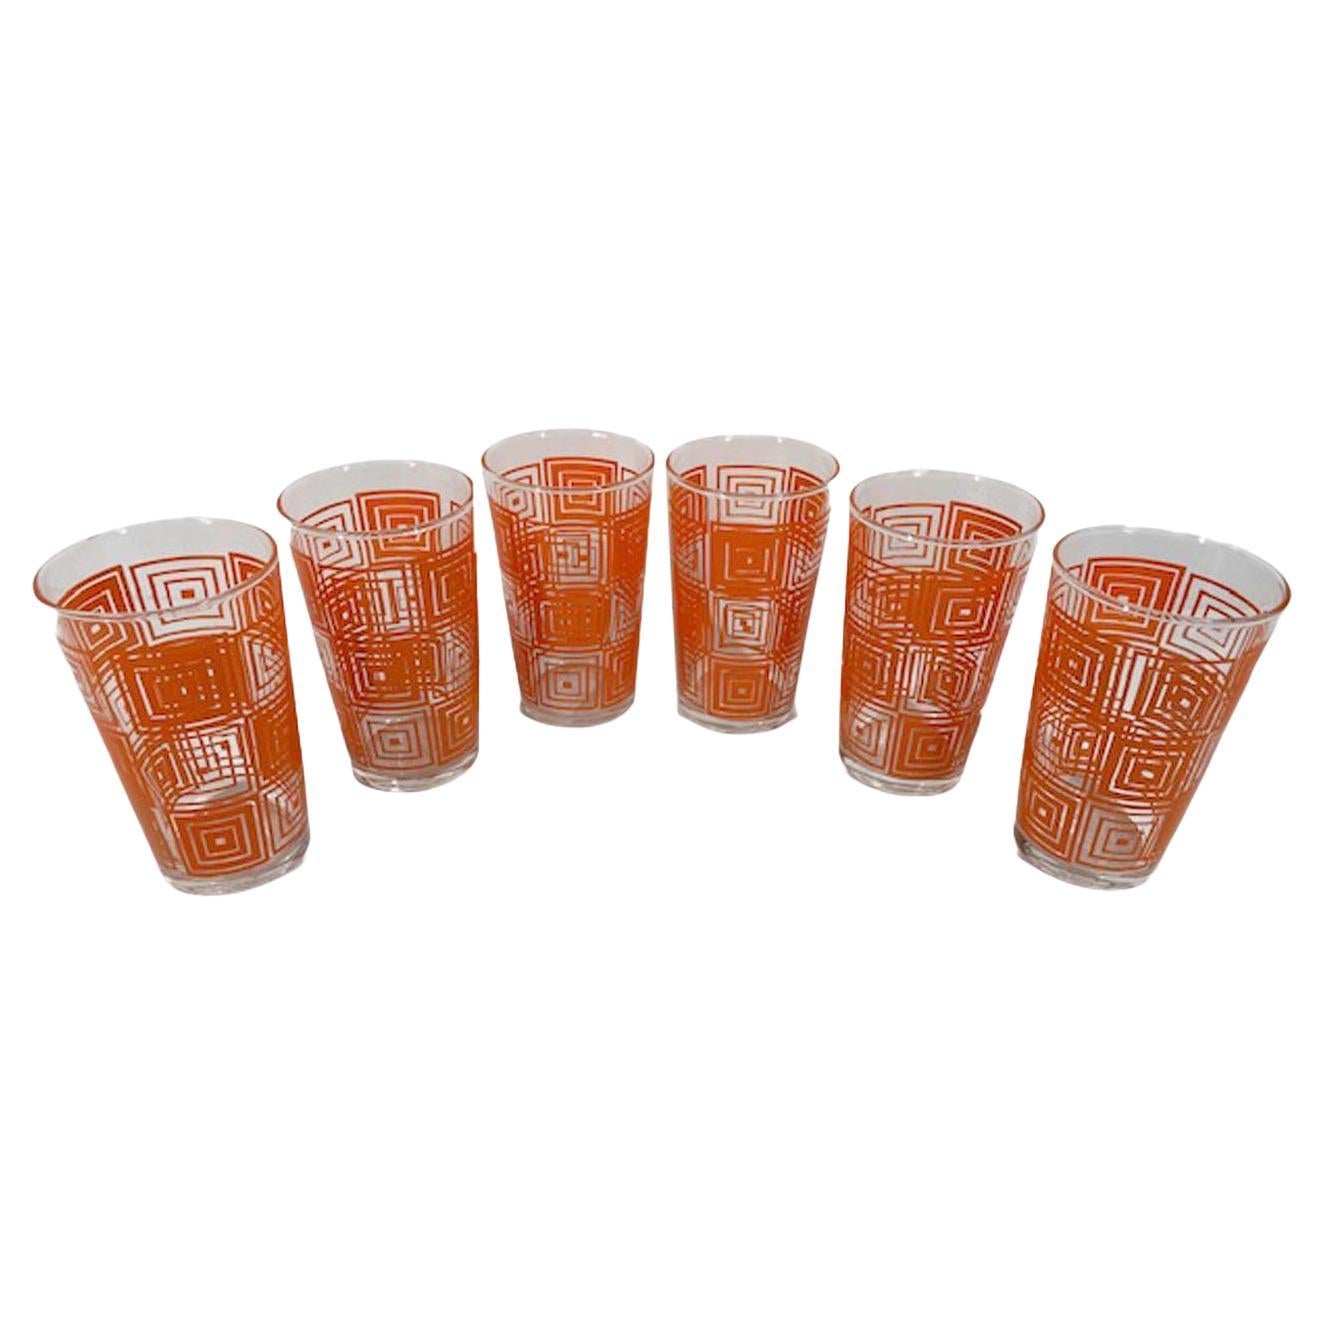 https://a.1stdibscdn.com/six-vintage-federal-glassware-tumblers-with-concentric-squares-in-orange-enamel-for-sale/f_13752/f_299290221660135347665/f_29929022_1660135348056_bg_processed.jpg